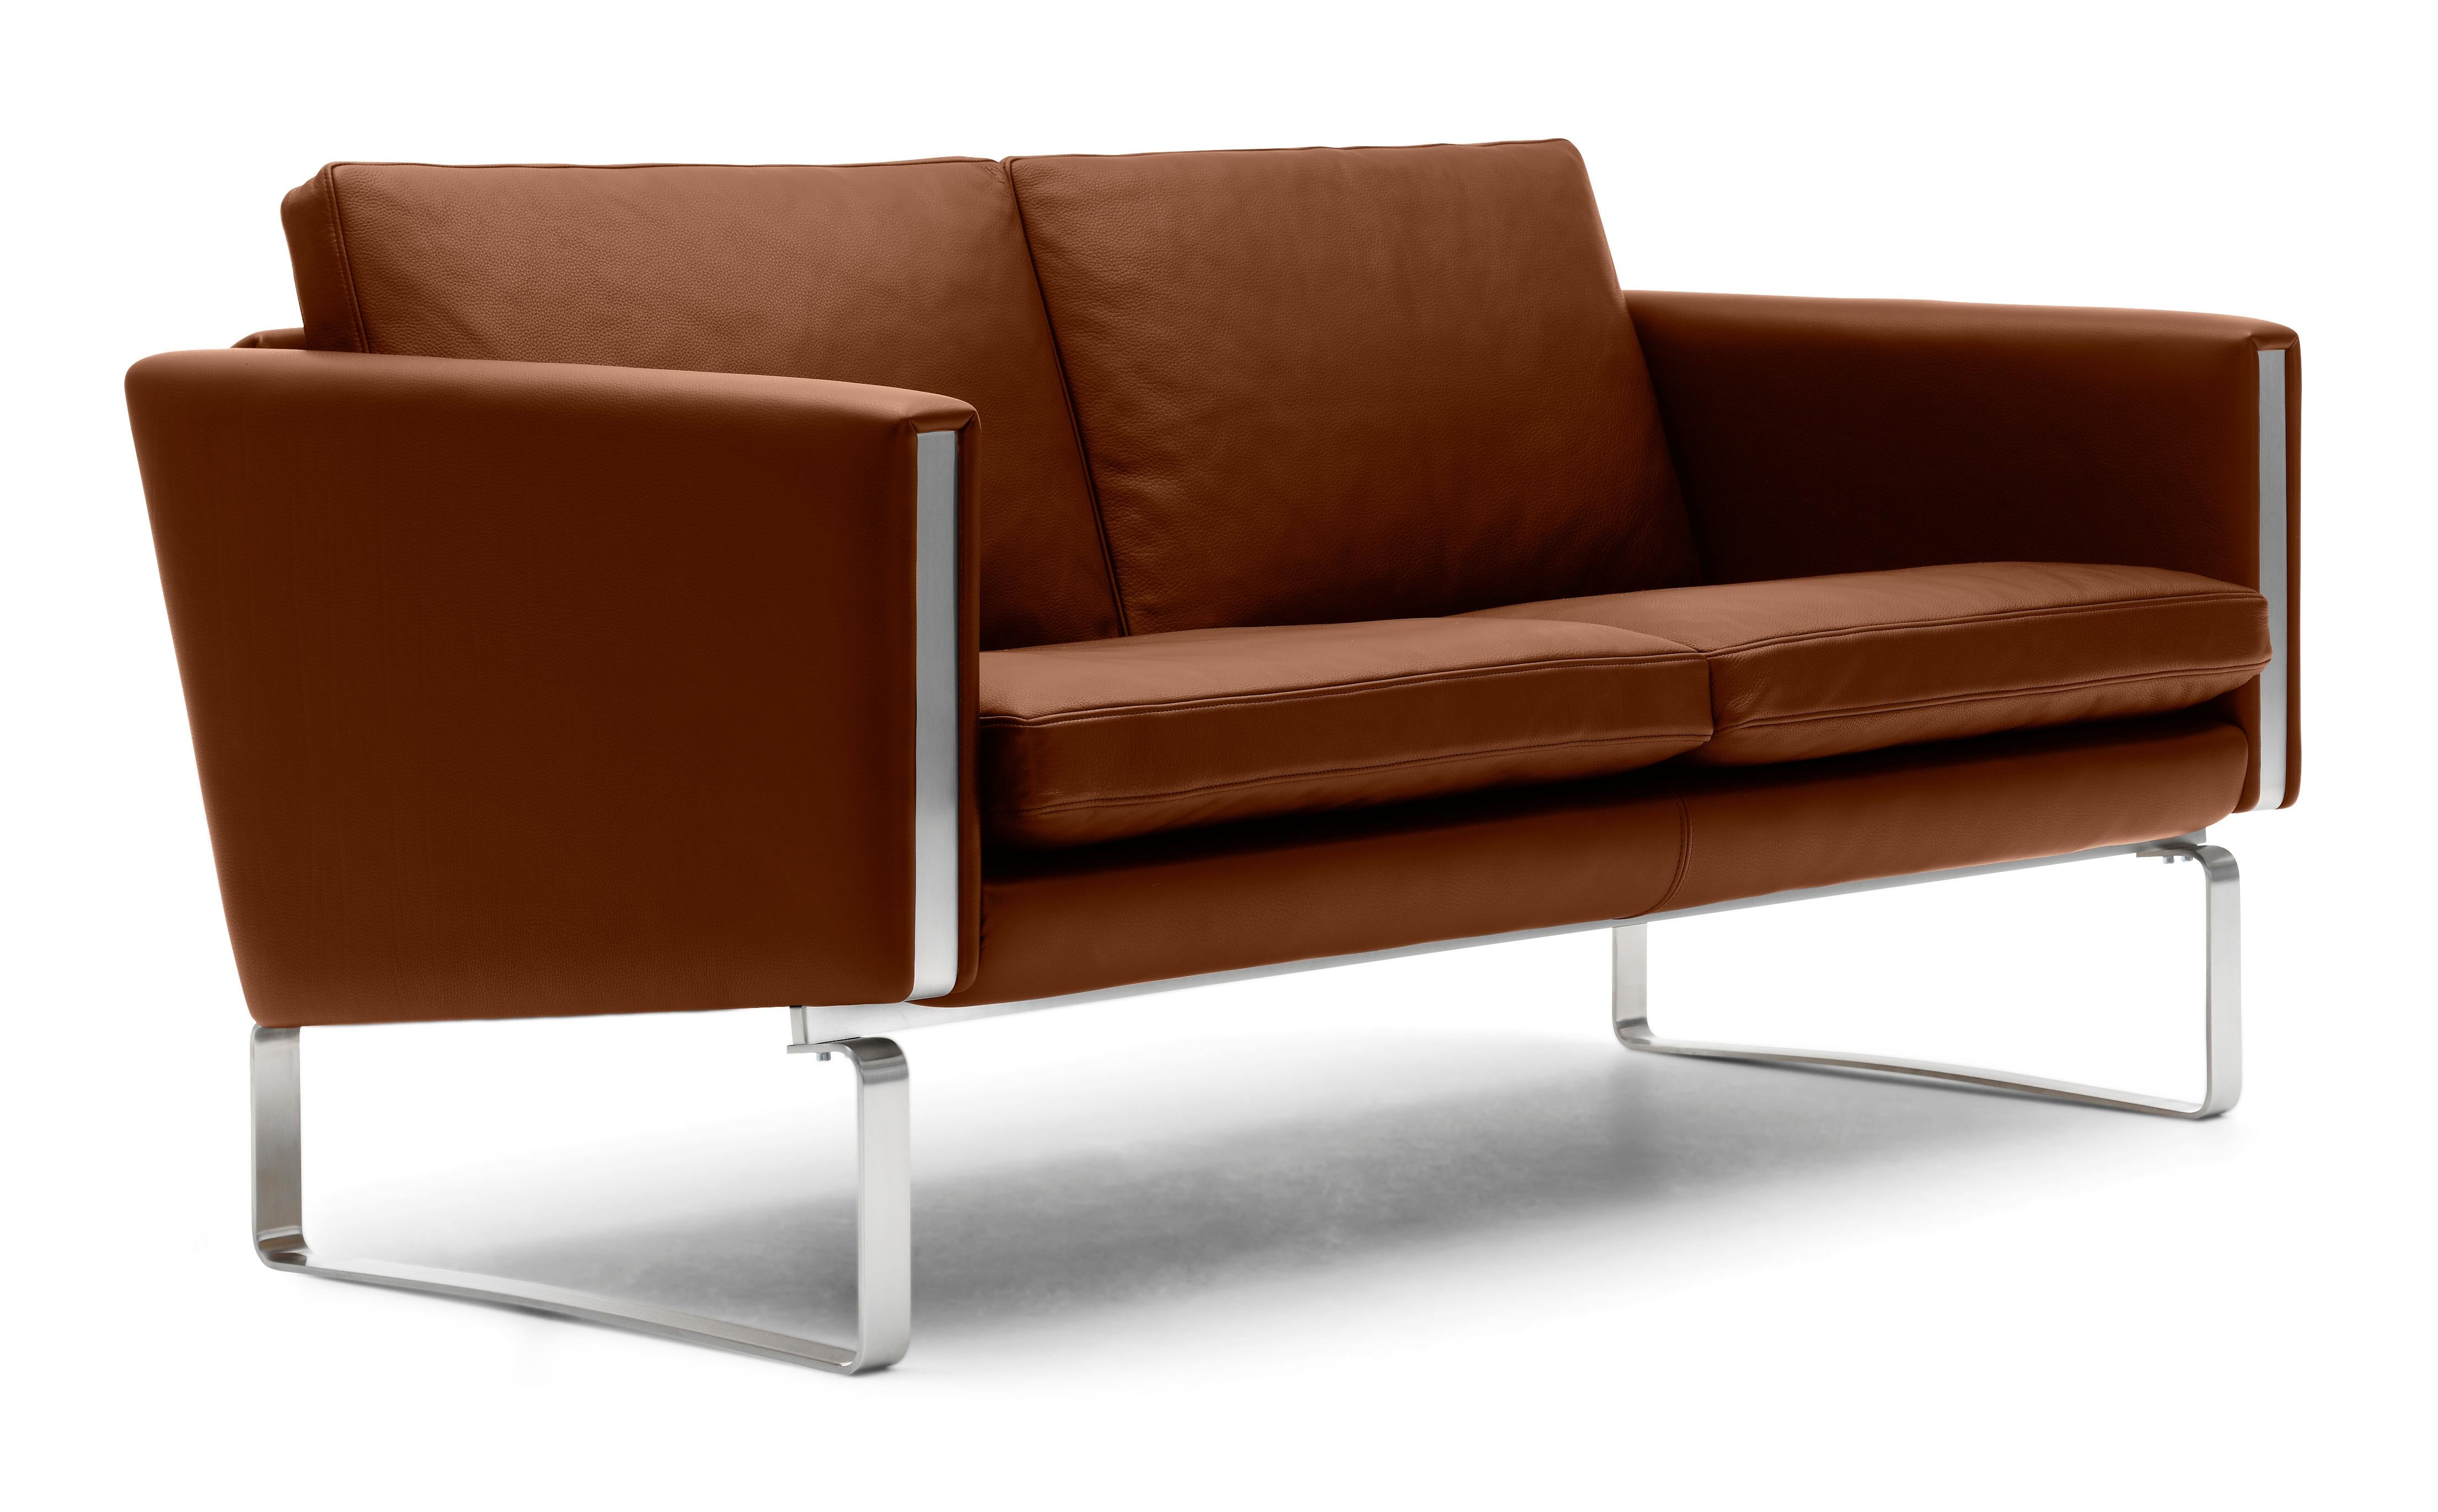 Brown (Thor 307) CH102 2-Seat Sofa in Stainless Steel Frame with Leather Seat by Hans J. Wegner 2